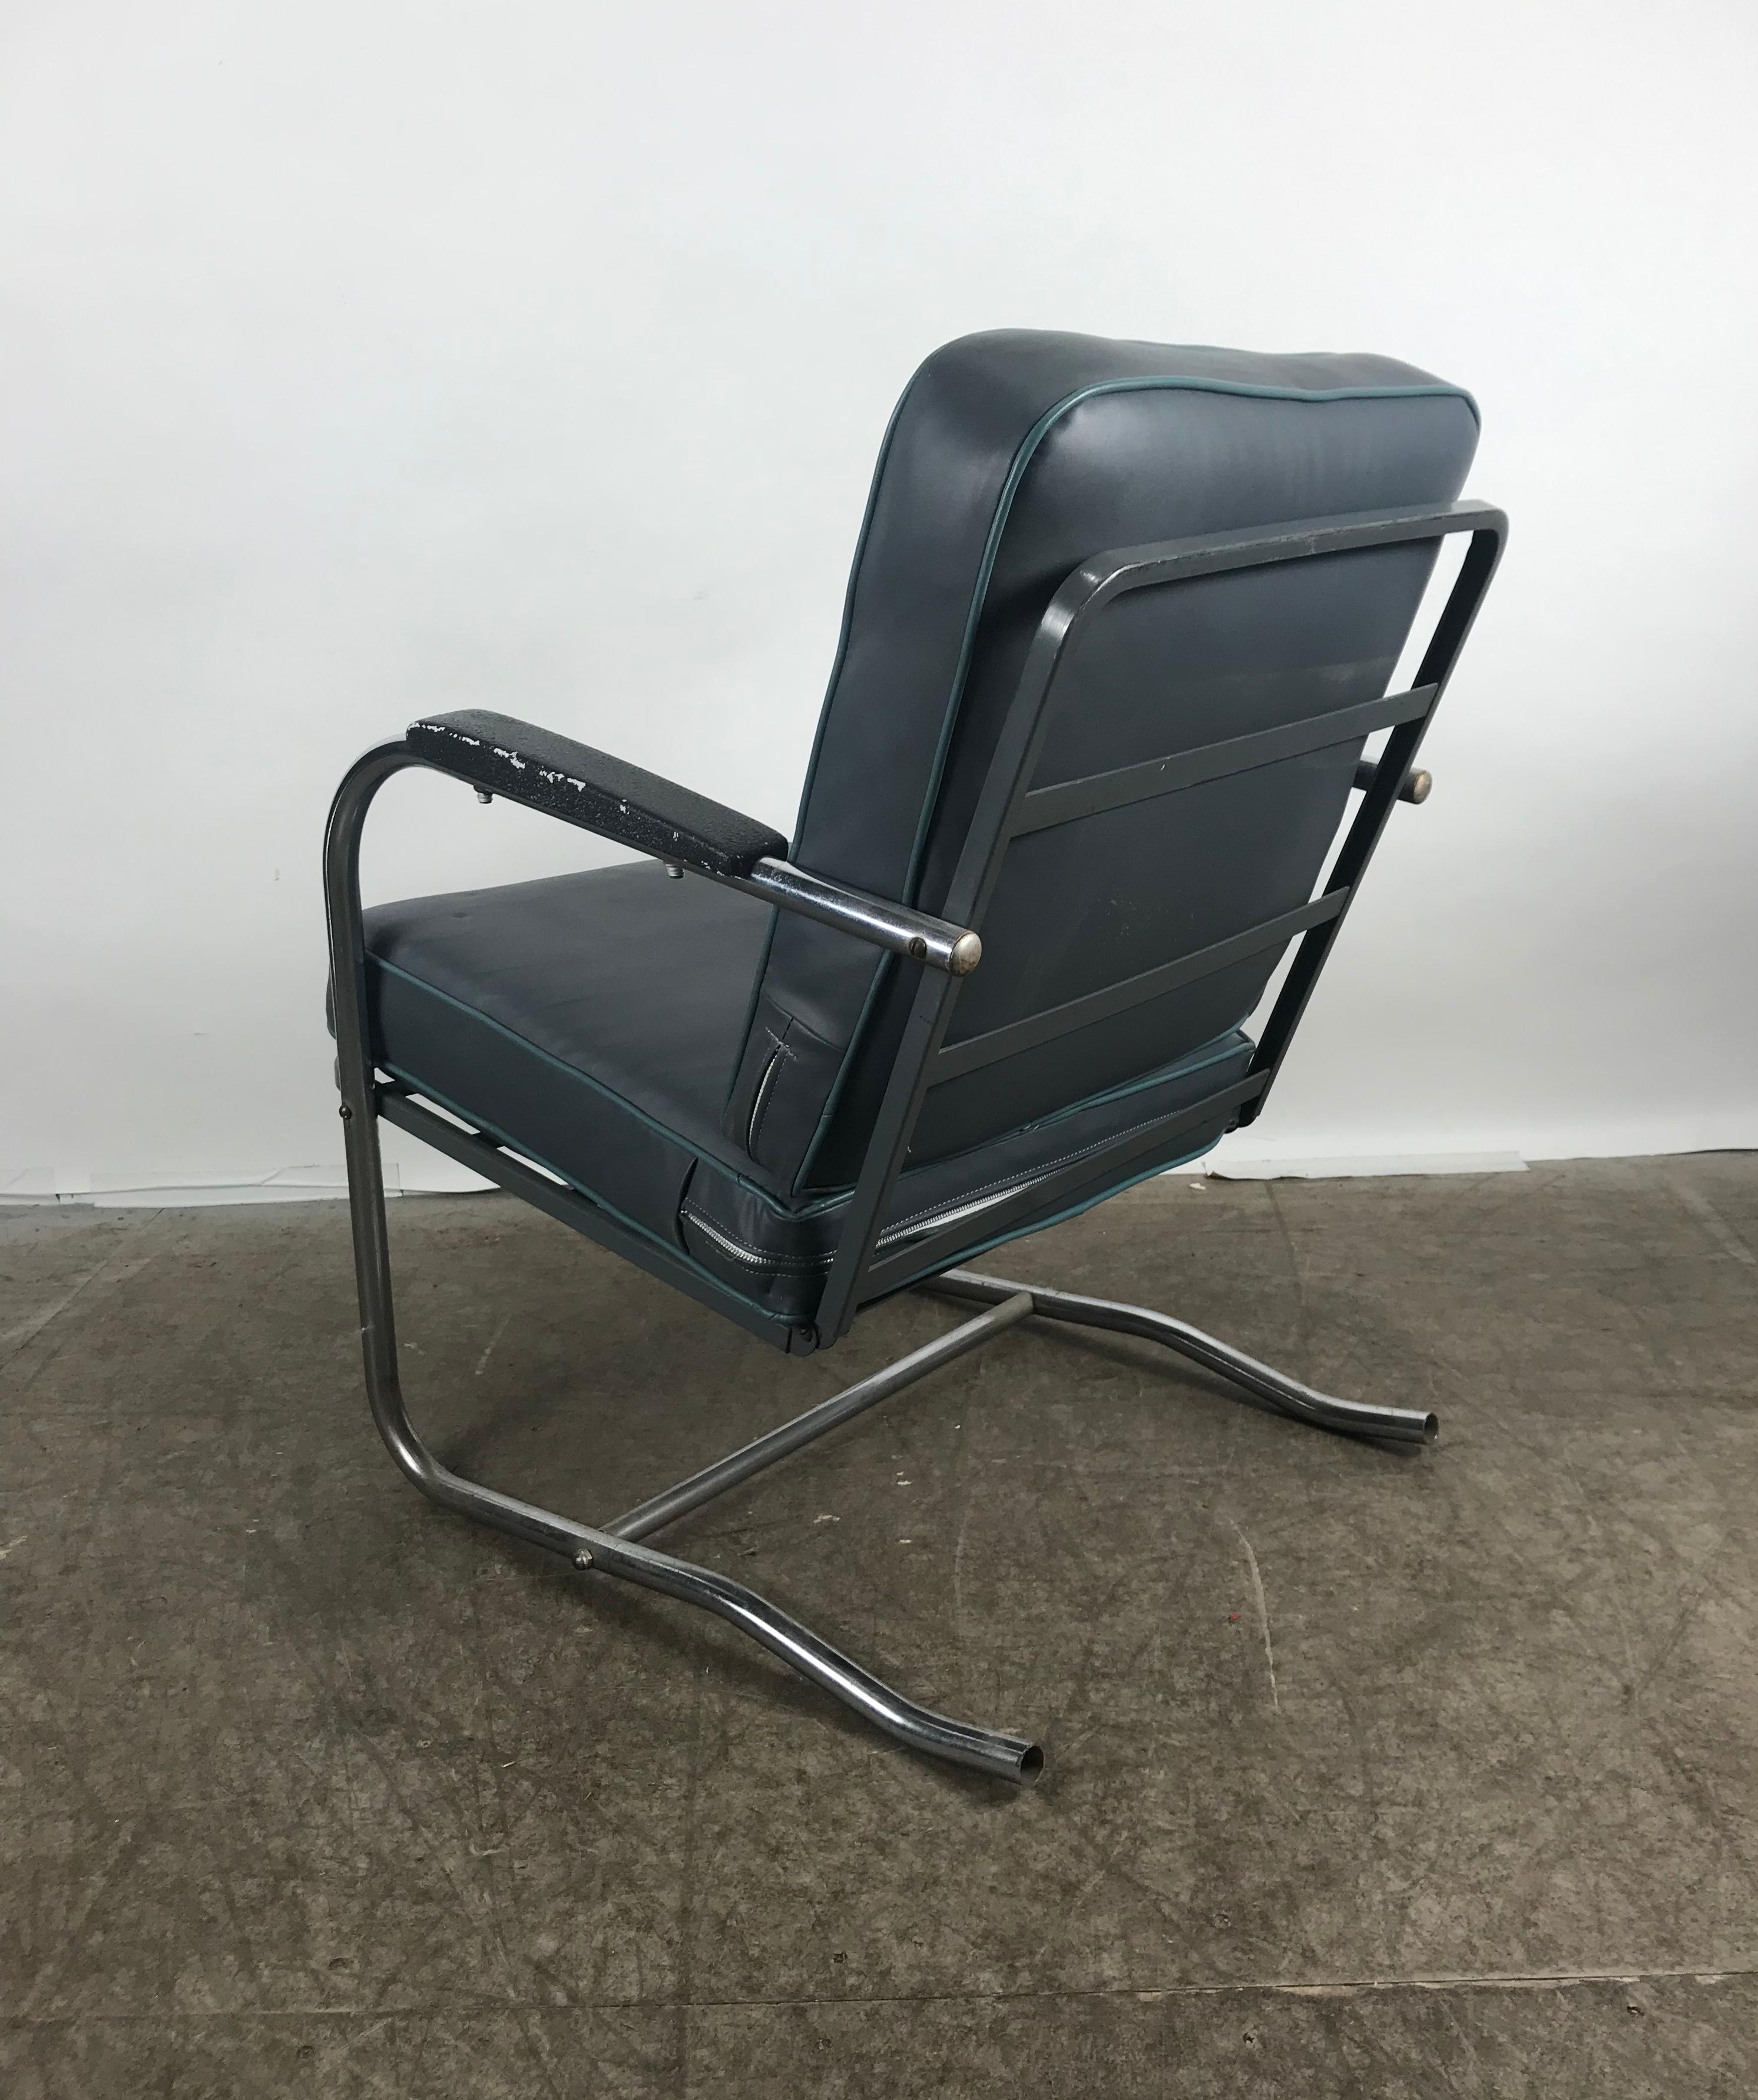 Classic Art Deco, Bauhaus Tubular Chrome Lounge Chair In Good Condition For Sale In Buffalo, NY